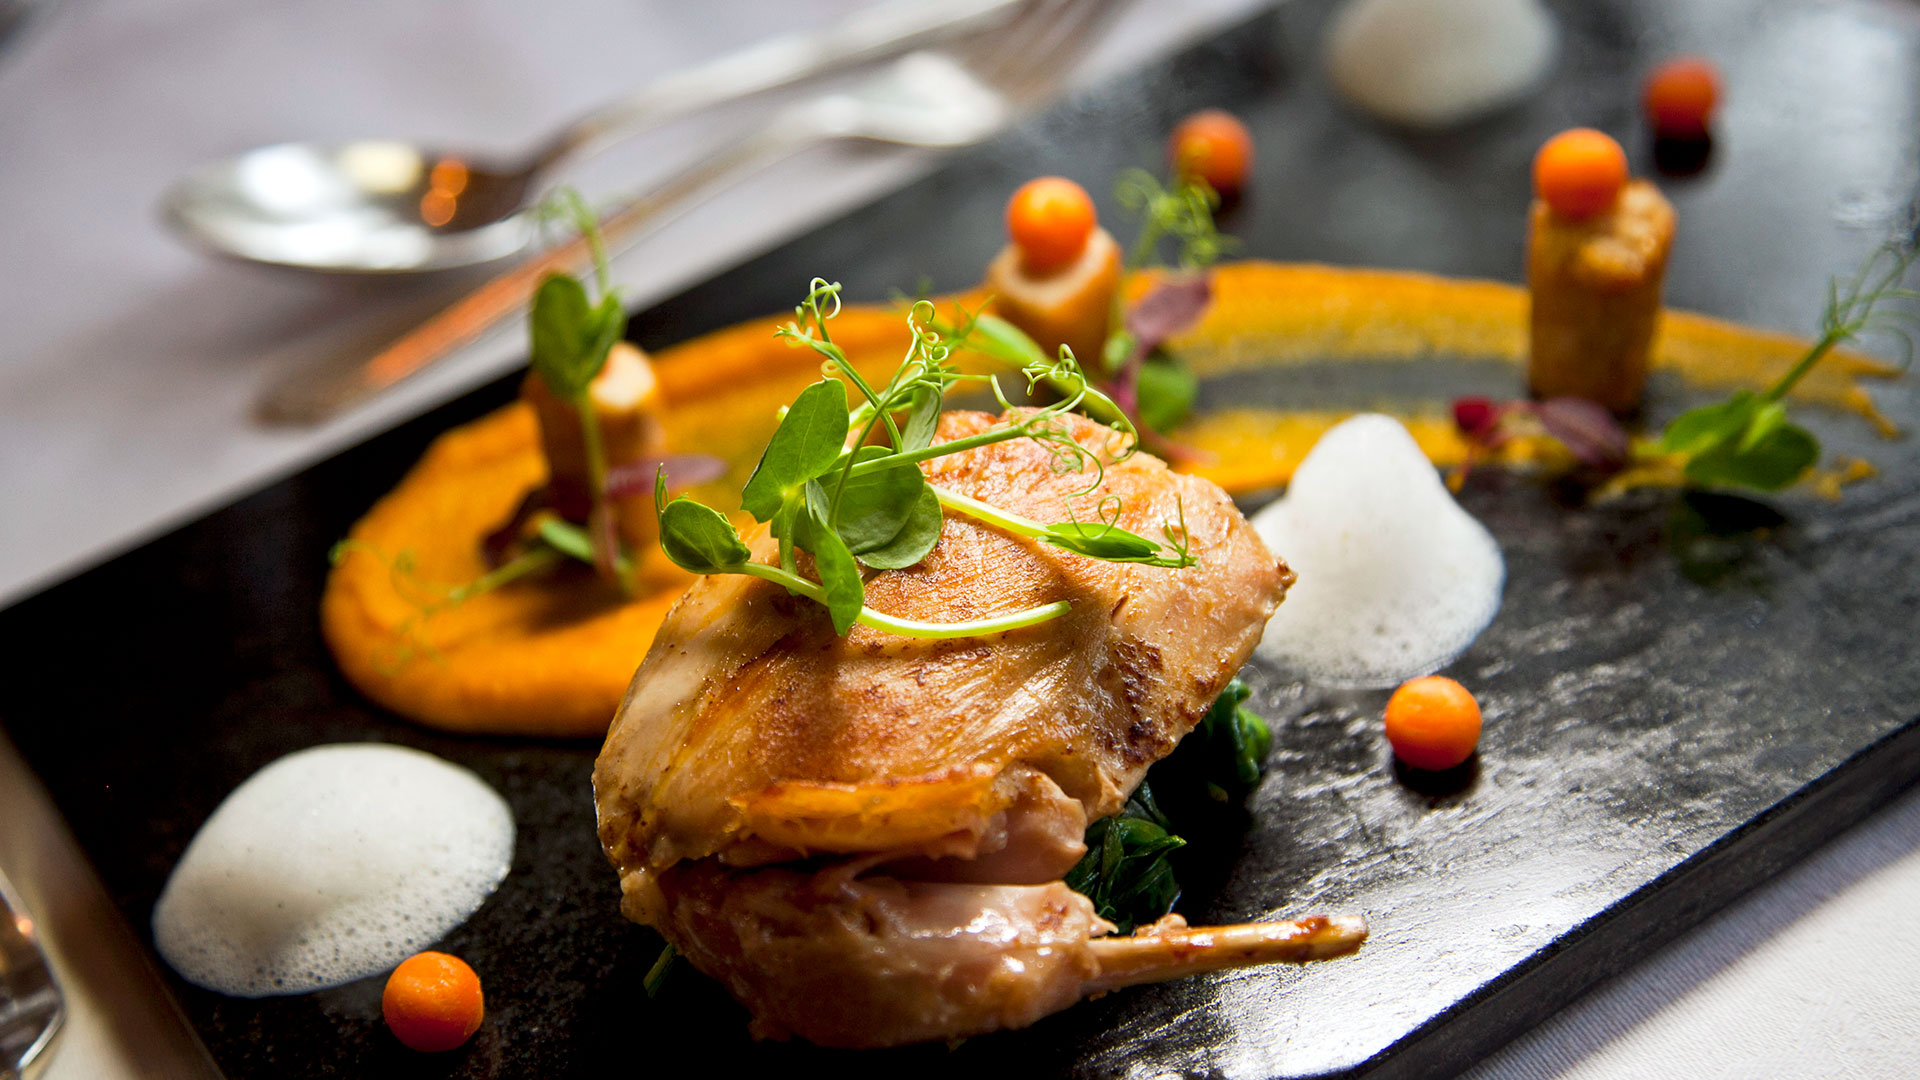 Award winning dining in the Langdale Restaurant - Rowton Hall Hotel & Spa, Chester